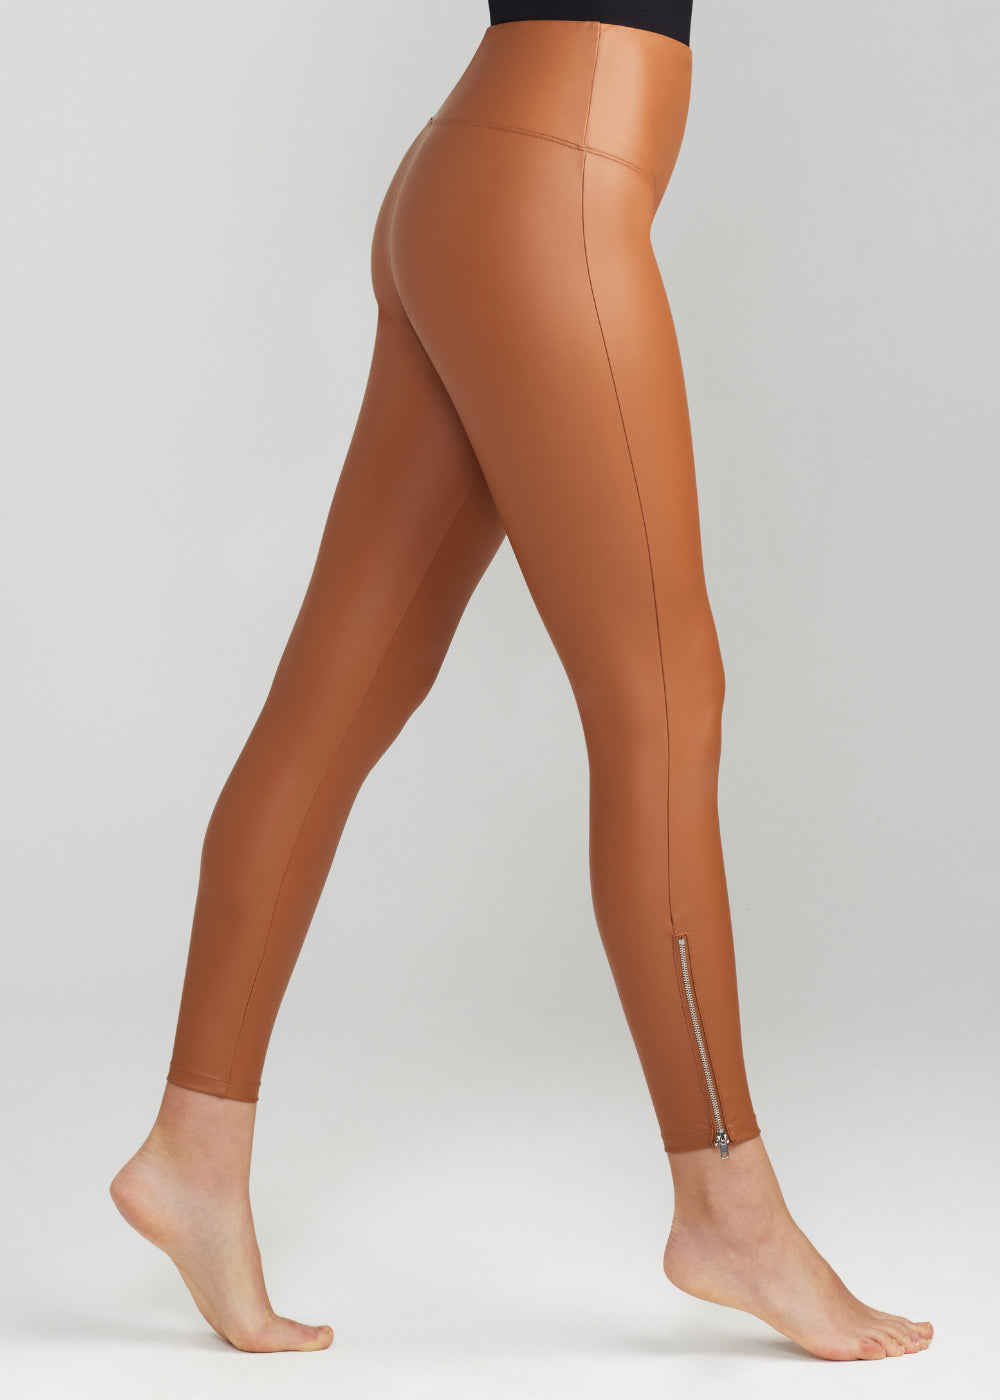 faux leather shaping legging with side zip in Rawhide Tan worn by a woman standing sideways Yummie